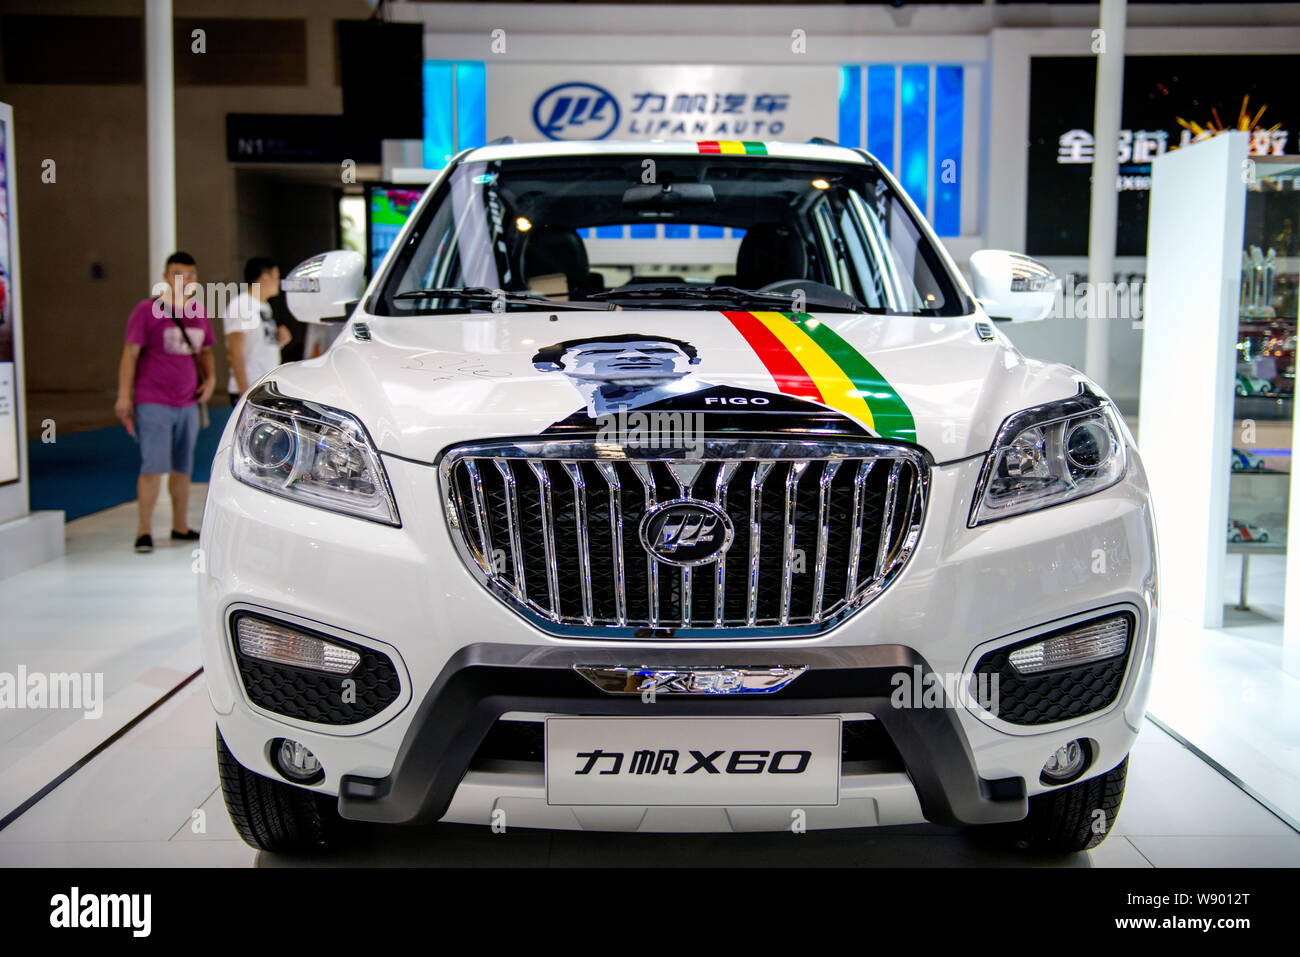 --FILE--A Lifan X60 SUV is displayed during an auto show in Chongqing, China, 11 June 2014.      Chinese motorcycle and automobile manufacturer Lifan Stock Photo